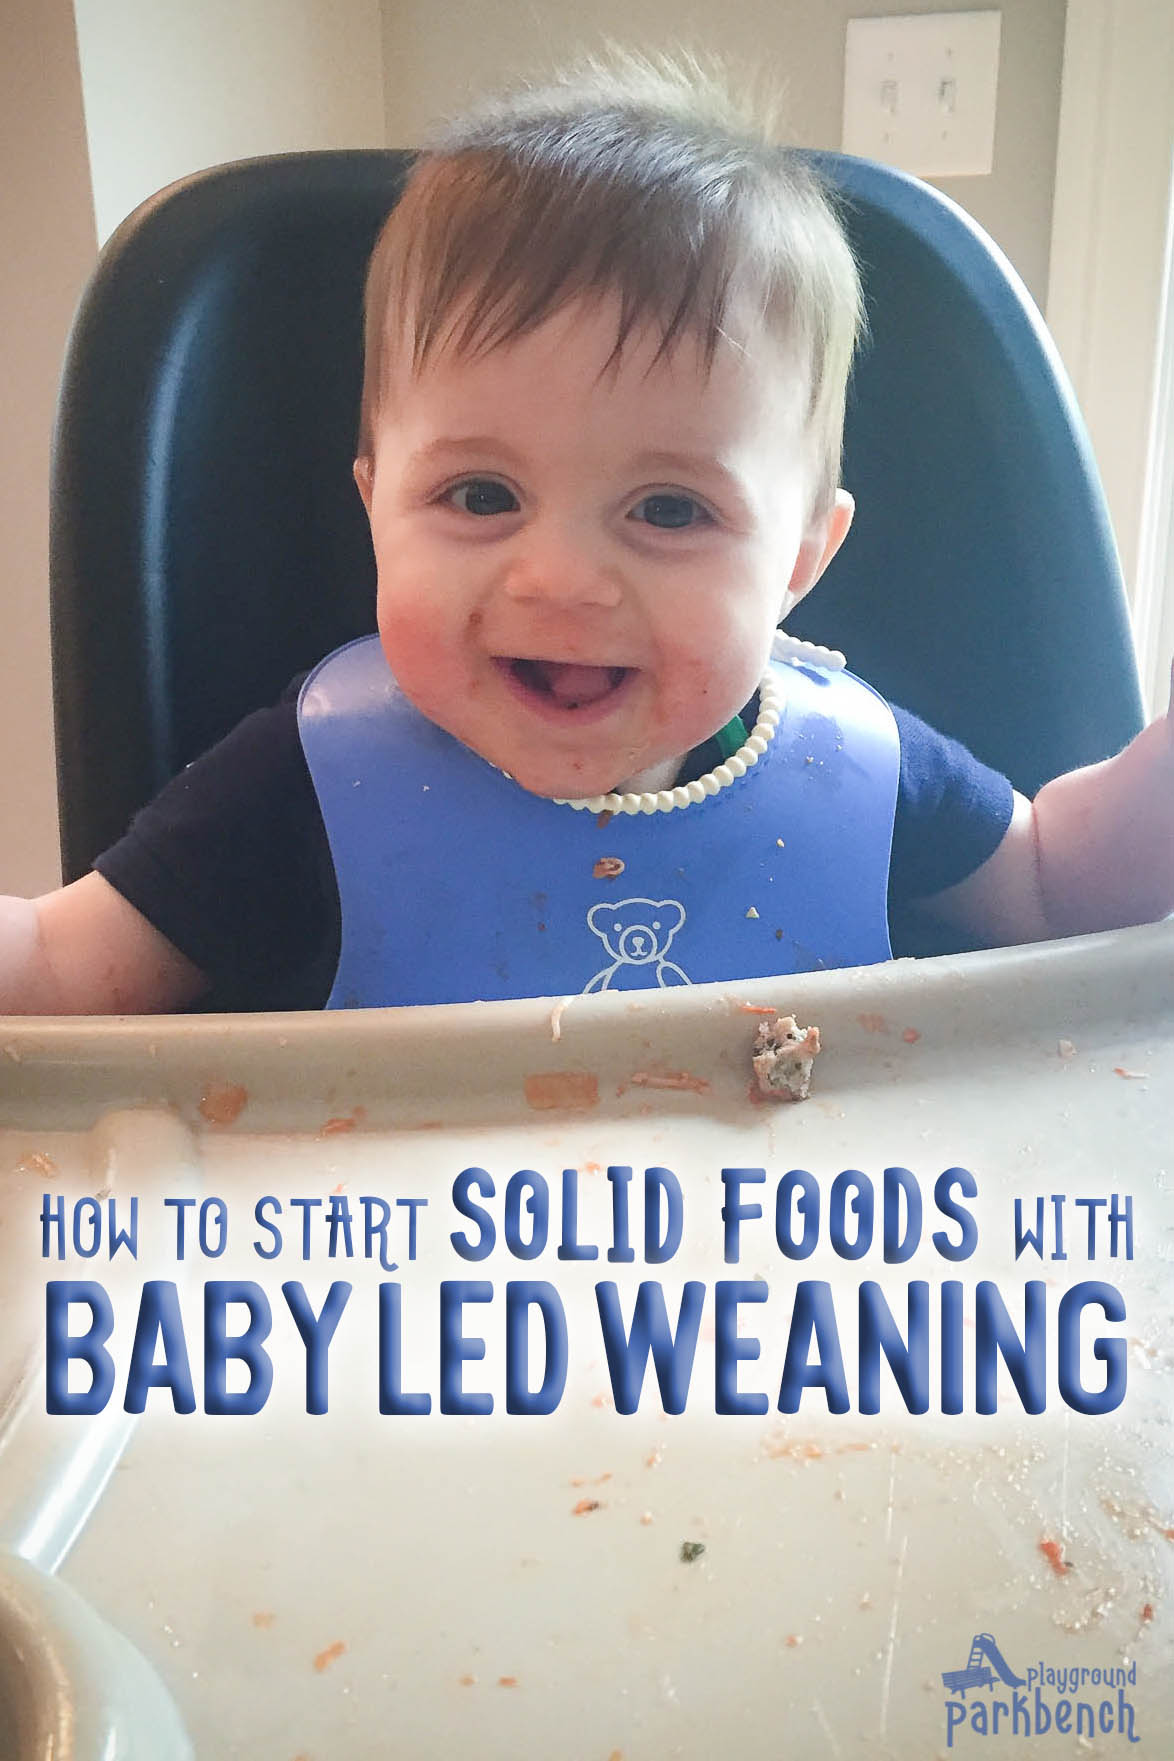 Is your 4-6 month old baby ready to start solid foods? Did you know you don't have to start with baby food? You can feed them right at the table and right off your plate with Baby Led Weaning. Learn what it is, what it means, and how to get started safely with these first baby led weaning foods #blw #babyledweaning #babyfood